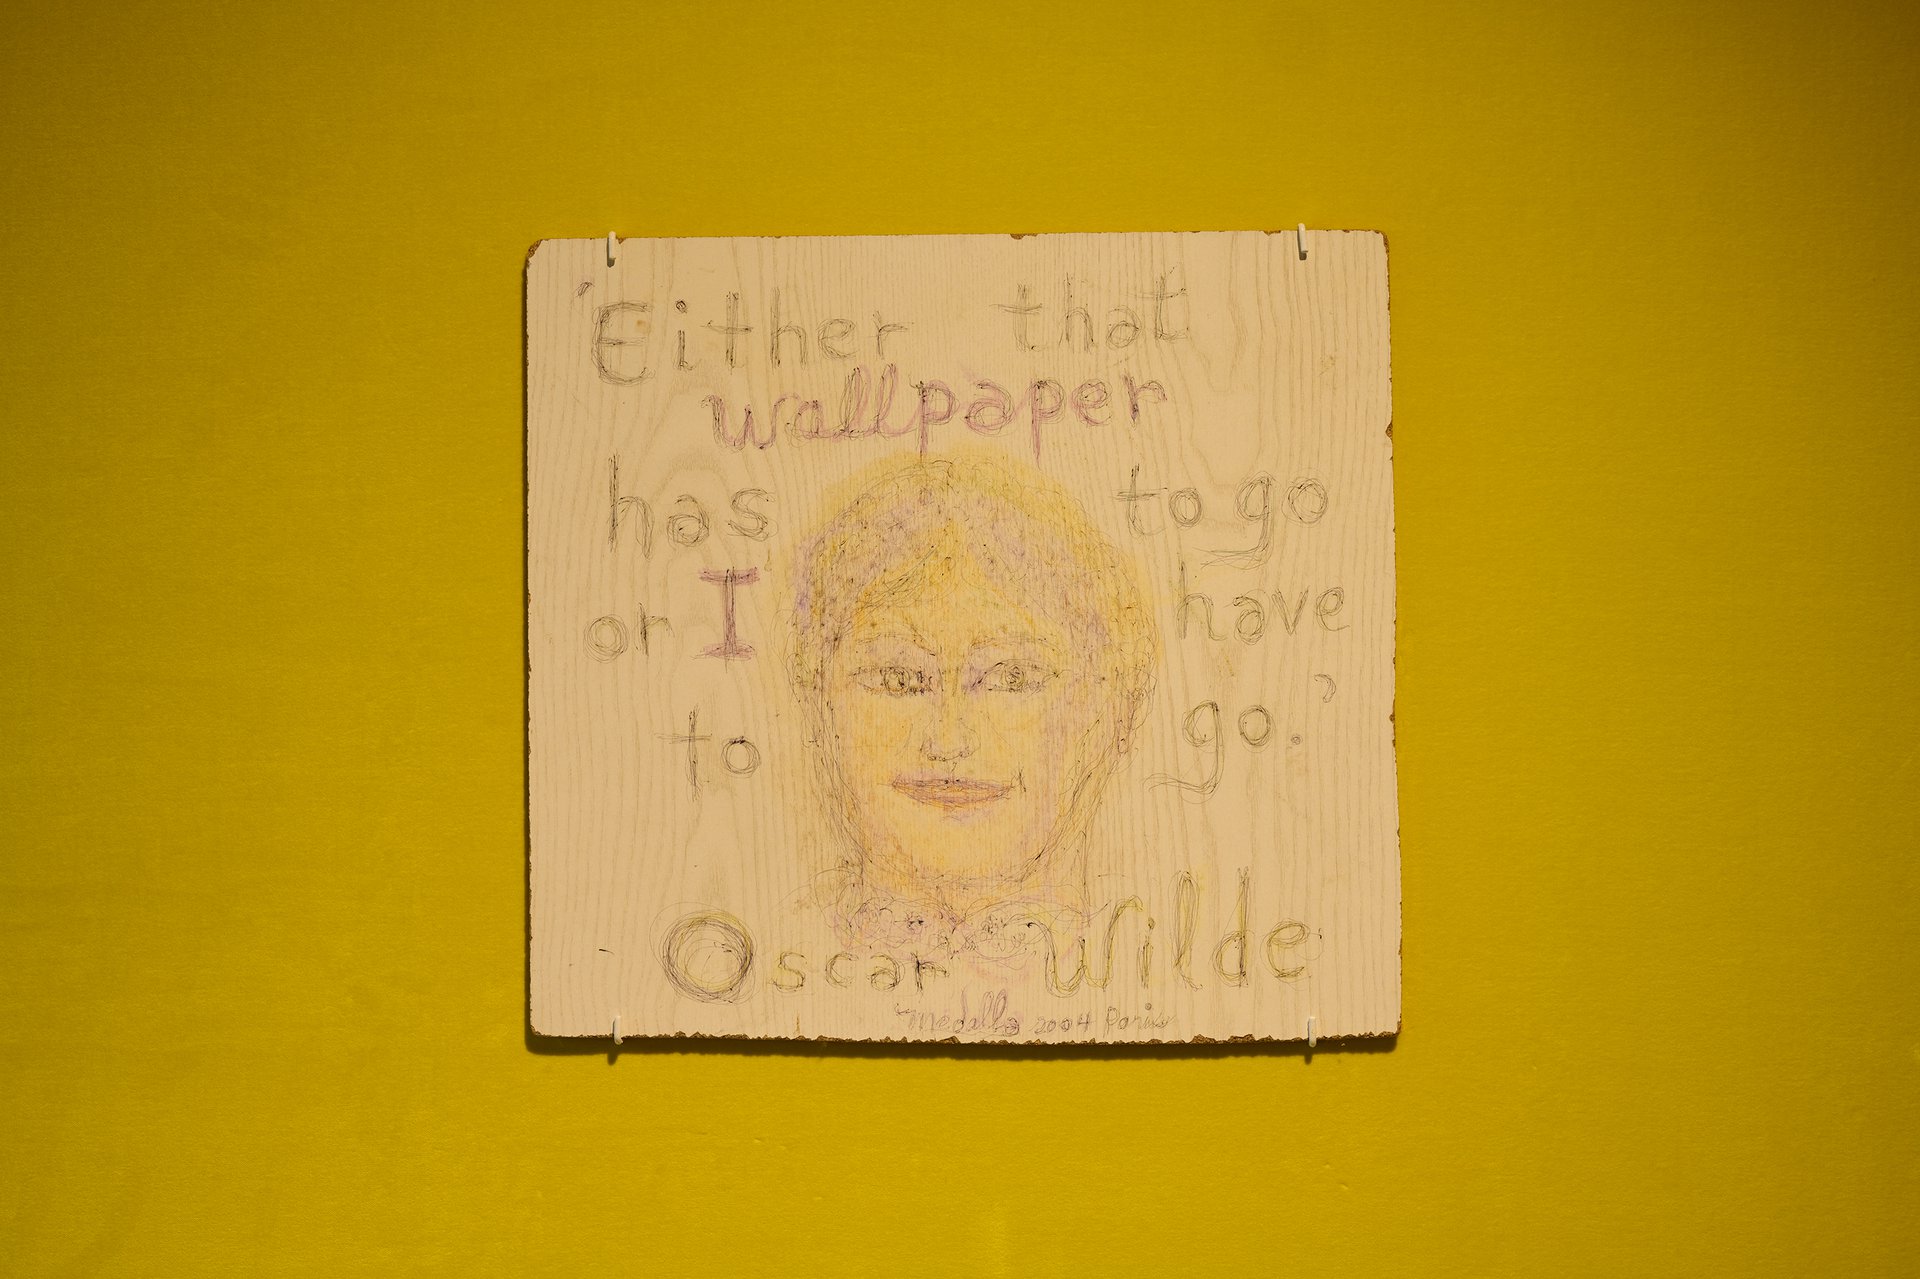 David Medalla, &#x27;Either that wallpaper has to go or I have to go.&#x27;, 2004, biro and colour pencil on laminated pressboard, 40,8 x 3,3 x 0,7 cm, Bonner Kunstverein, 2021. 